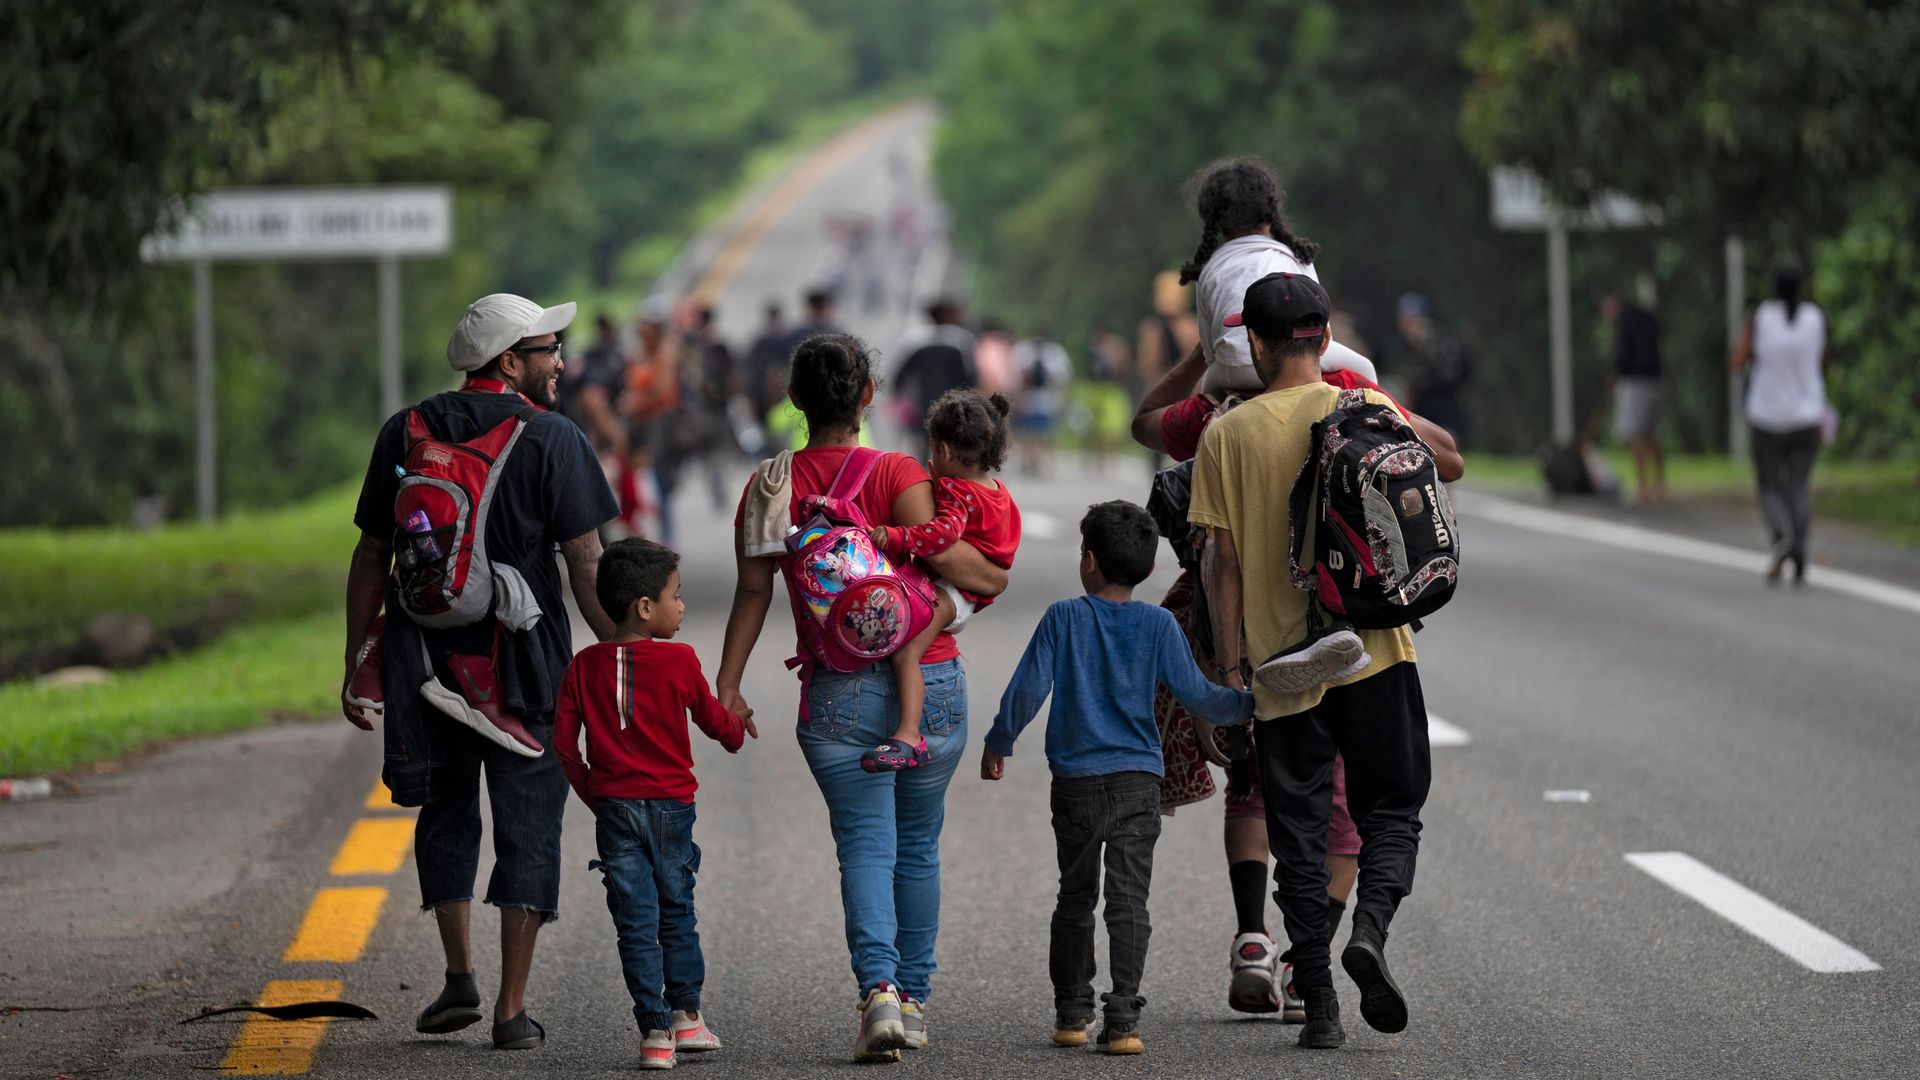 A family of migrants walking on a road